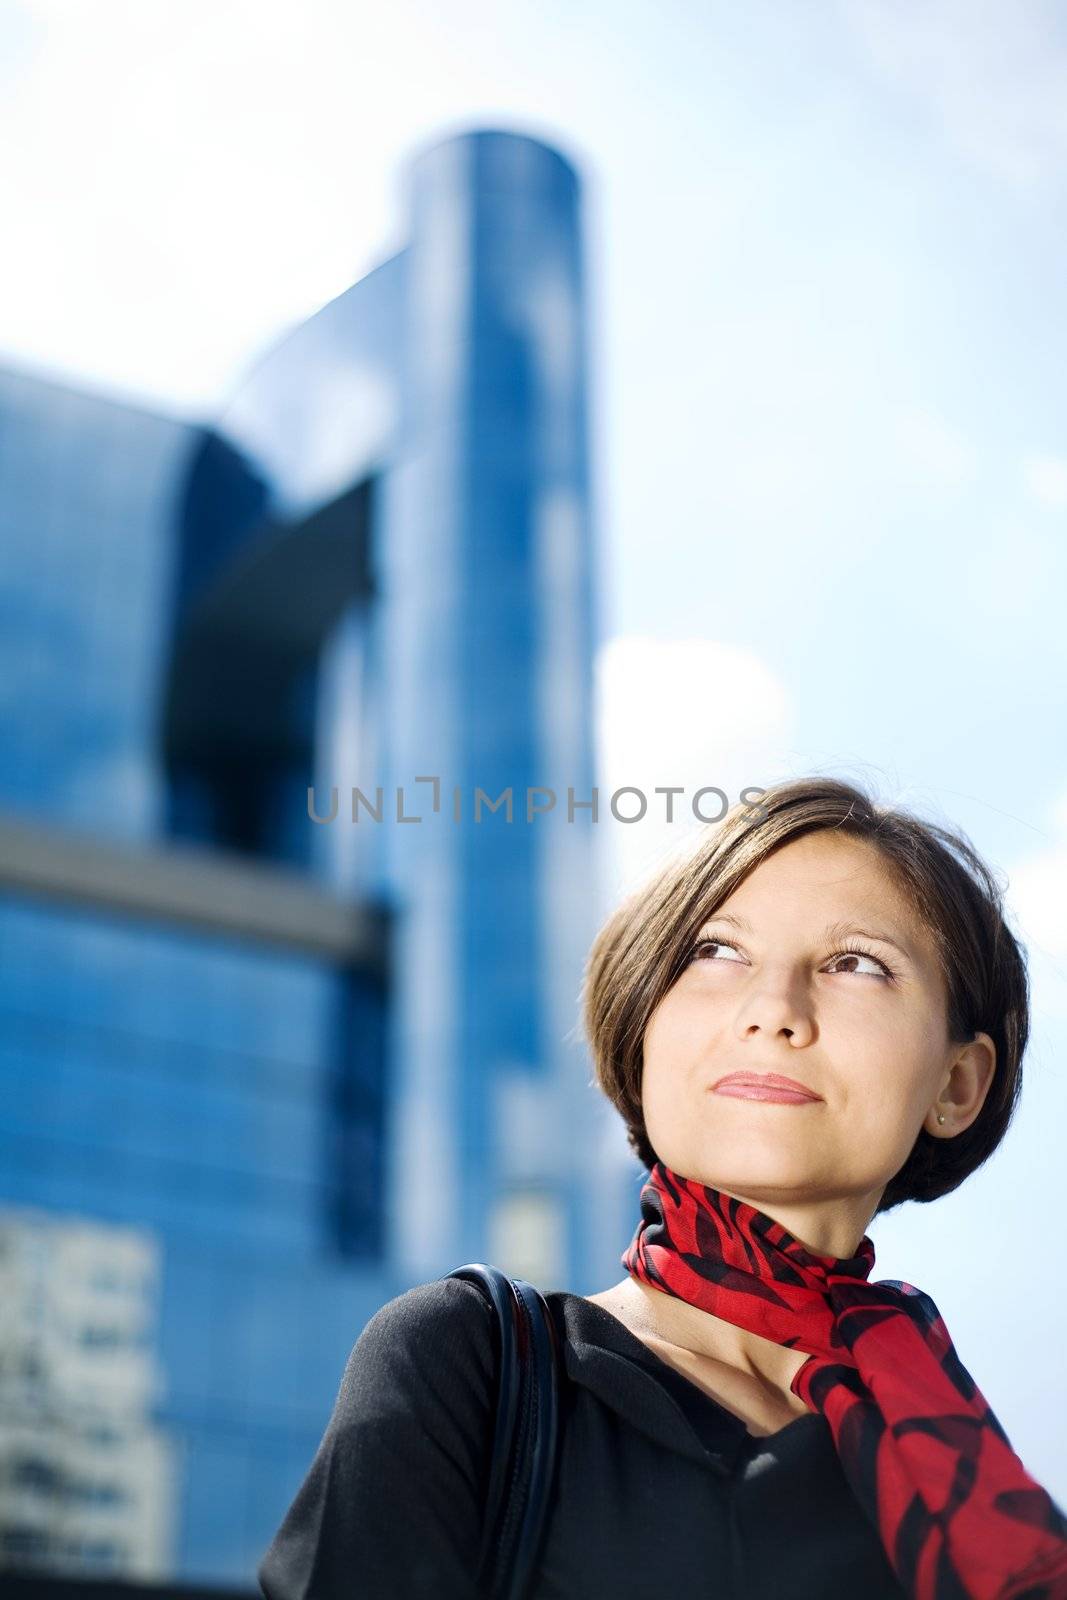 An image of a young woman in the city